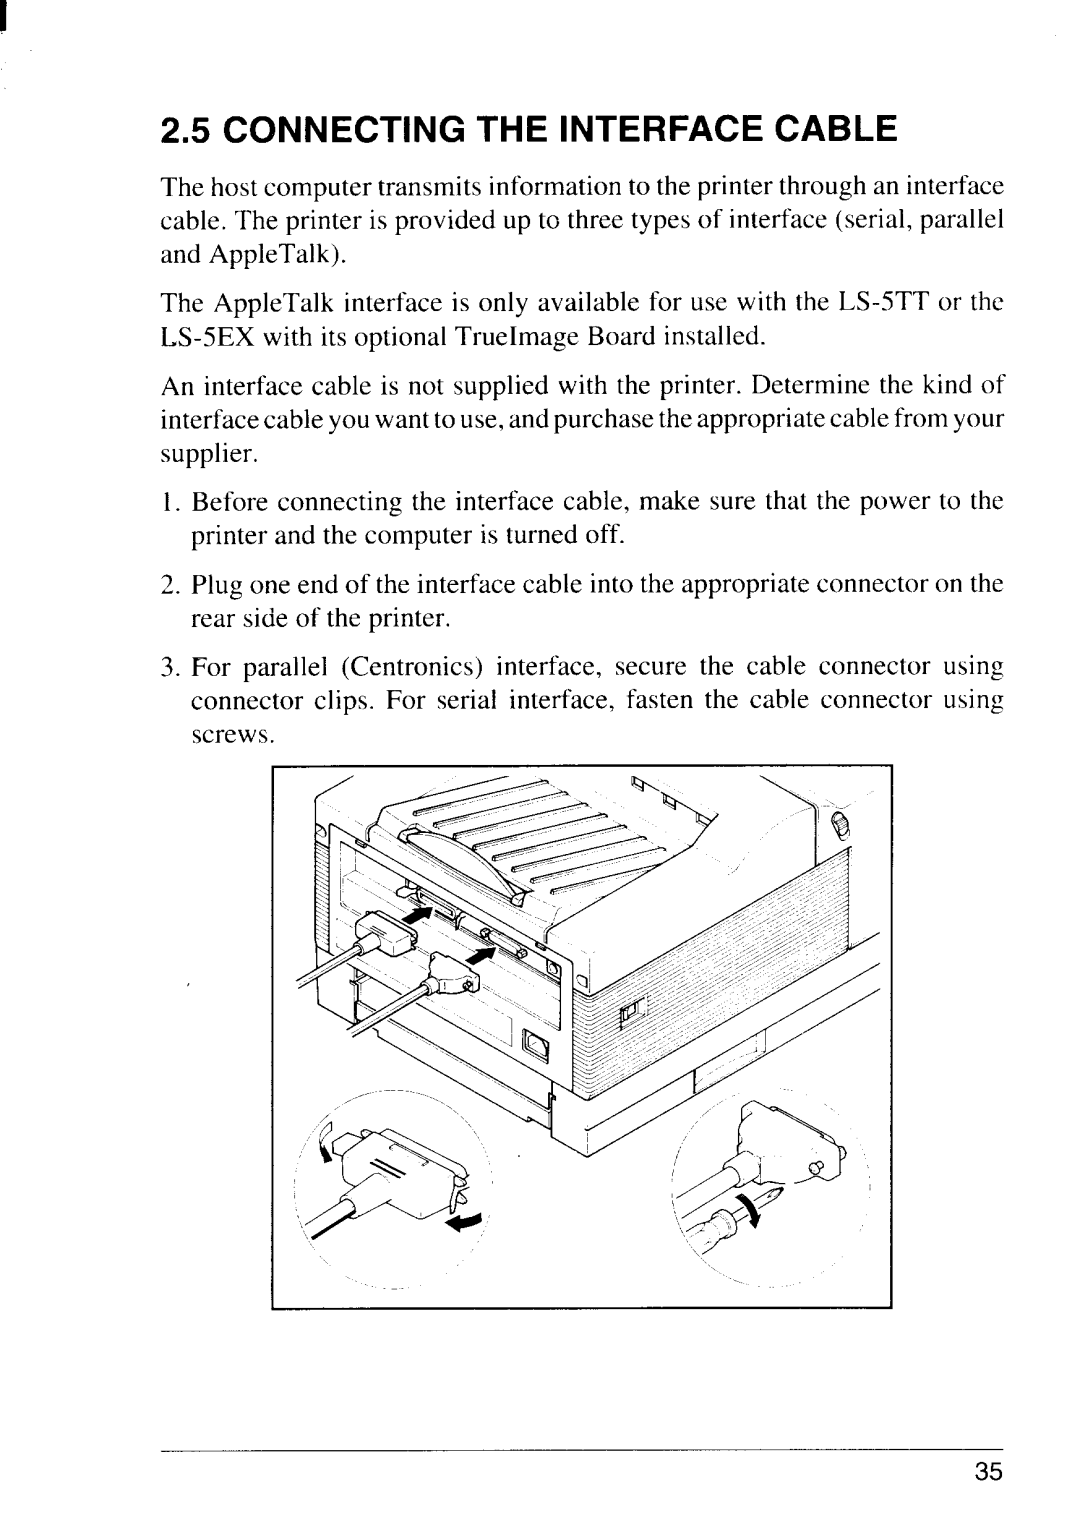 Star Micronics LS-5 TT, LS-5 EX operation manual Connecting The Interface Cable 